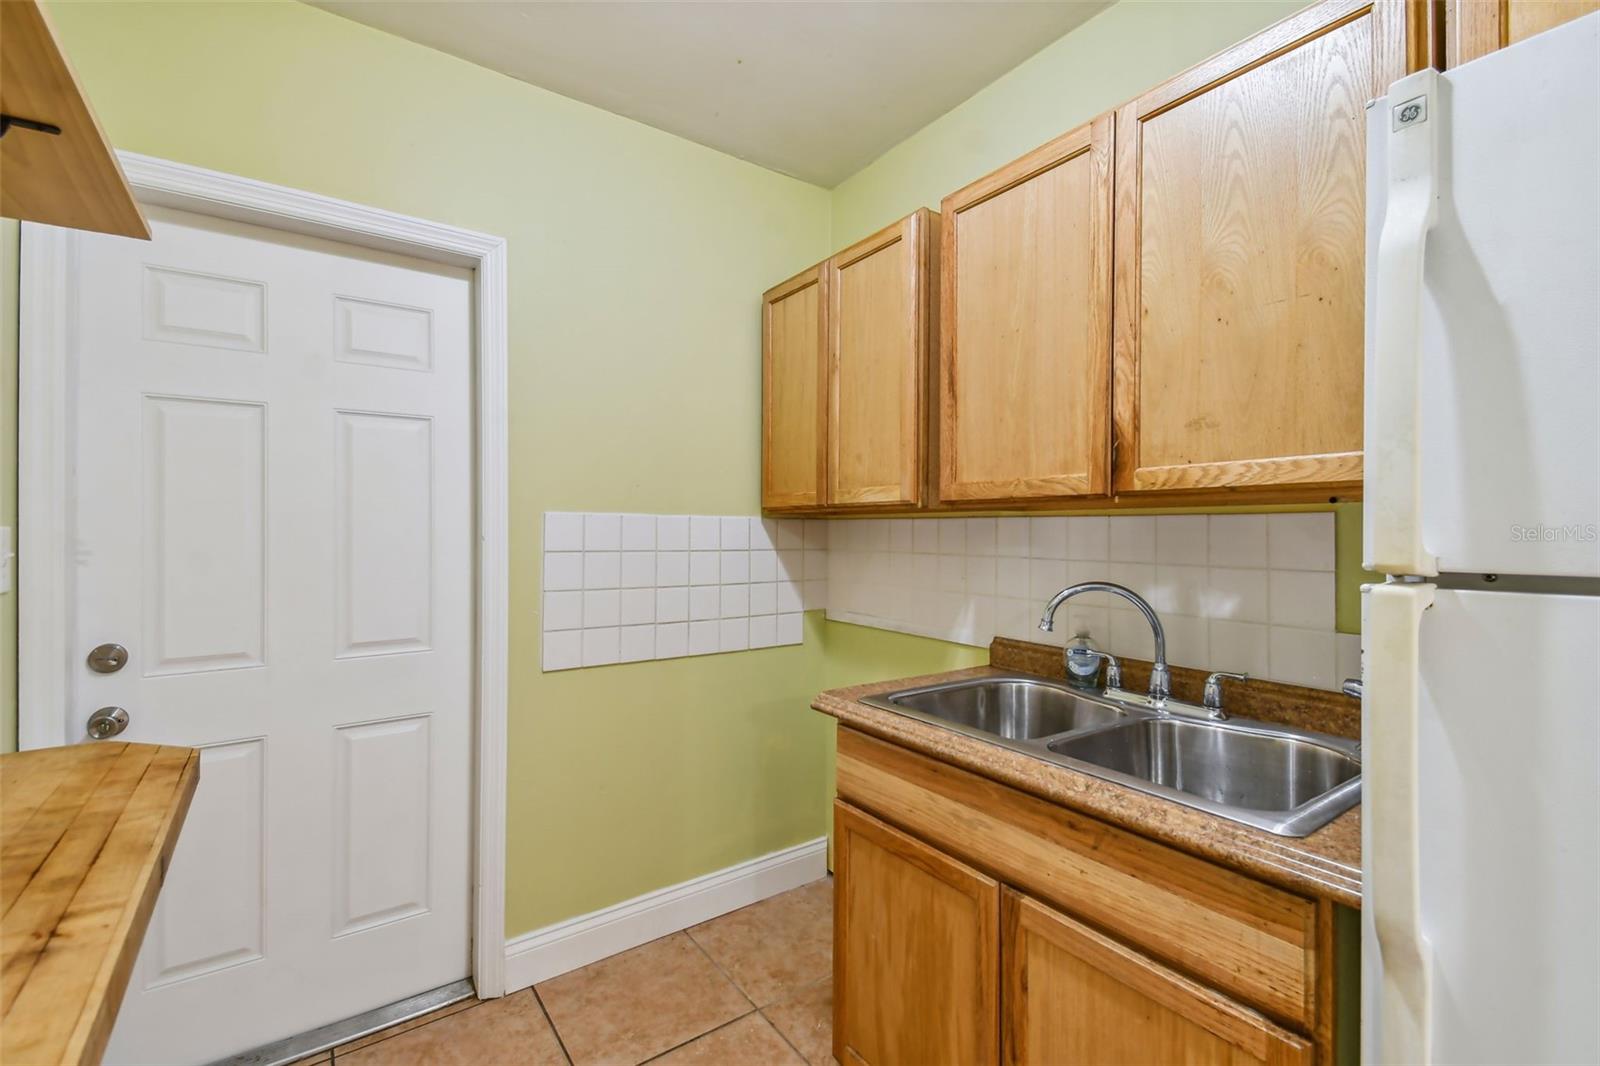 Kitchen in Studio Apartment with room for a stove.